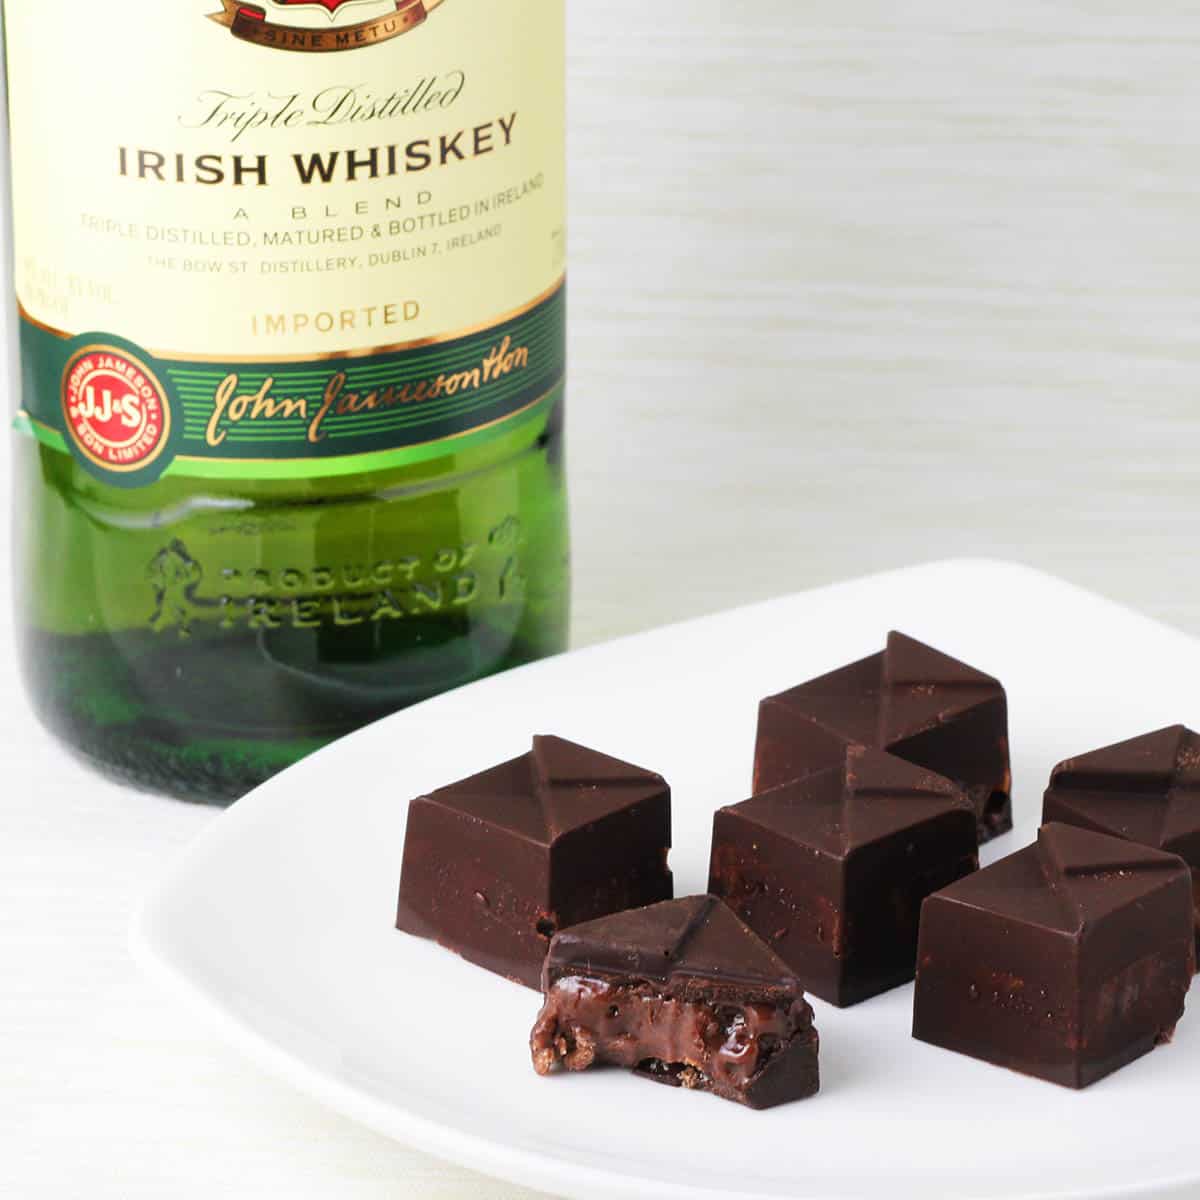 a white plate with several whisky filled chocolates in front of a bottle of Jameson Irish whisky on a light background